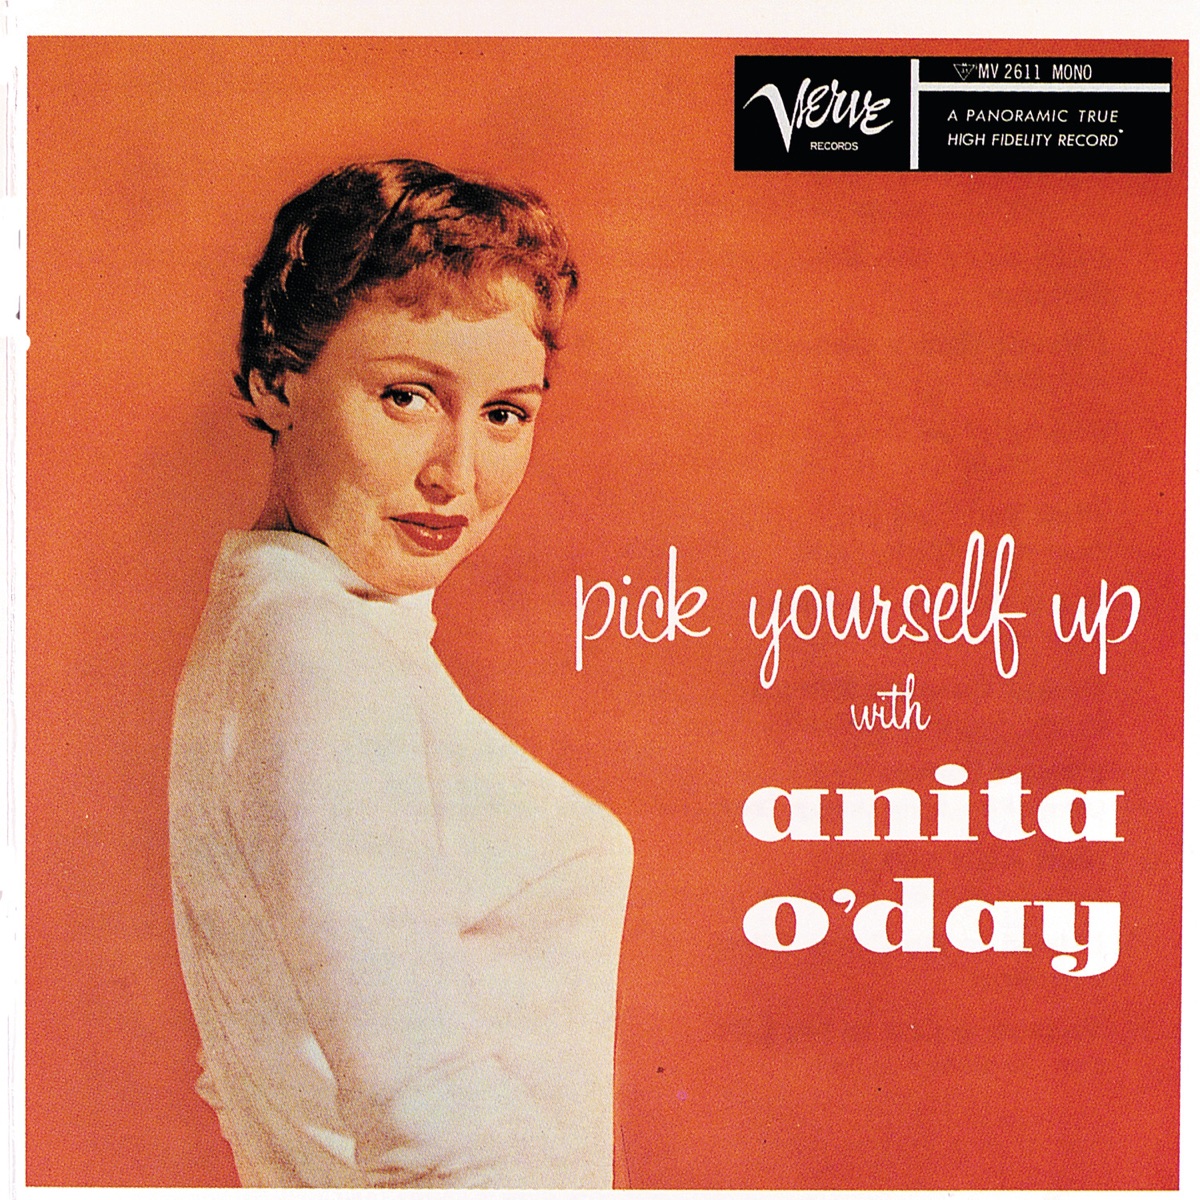 Pick Yourself Up (Expanded Edition) - Album by Anita O'Day - Apple Music